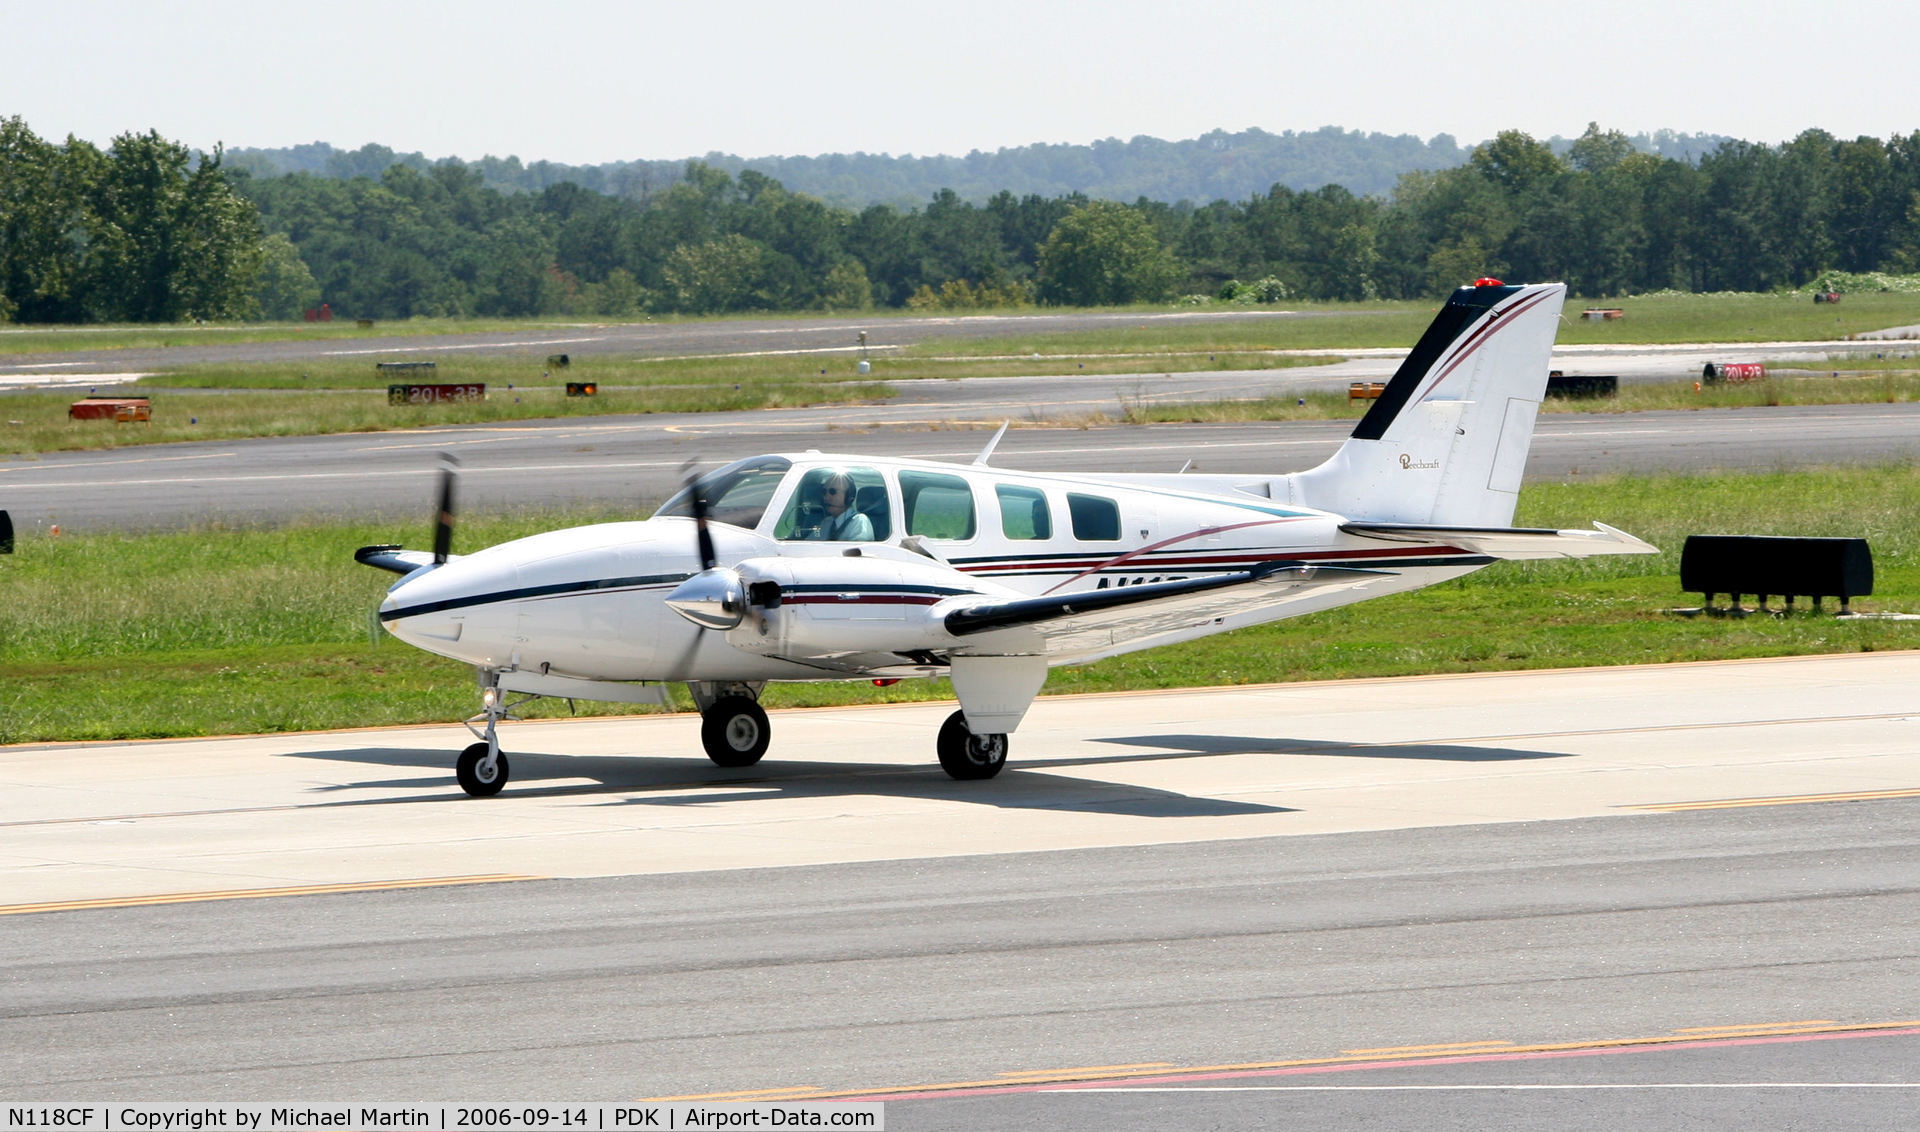 N118CF, 1978 Beech 58 Baron C/N TH-924, Taxing to Epps Air Service